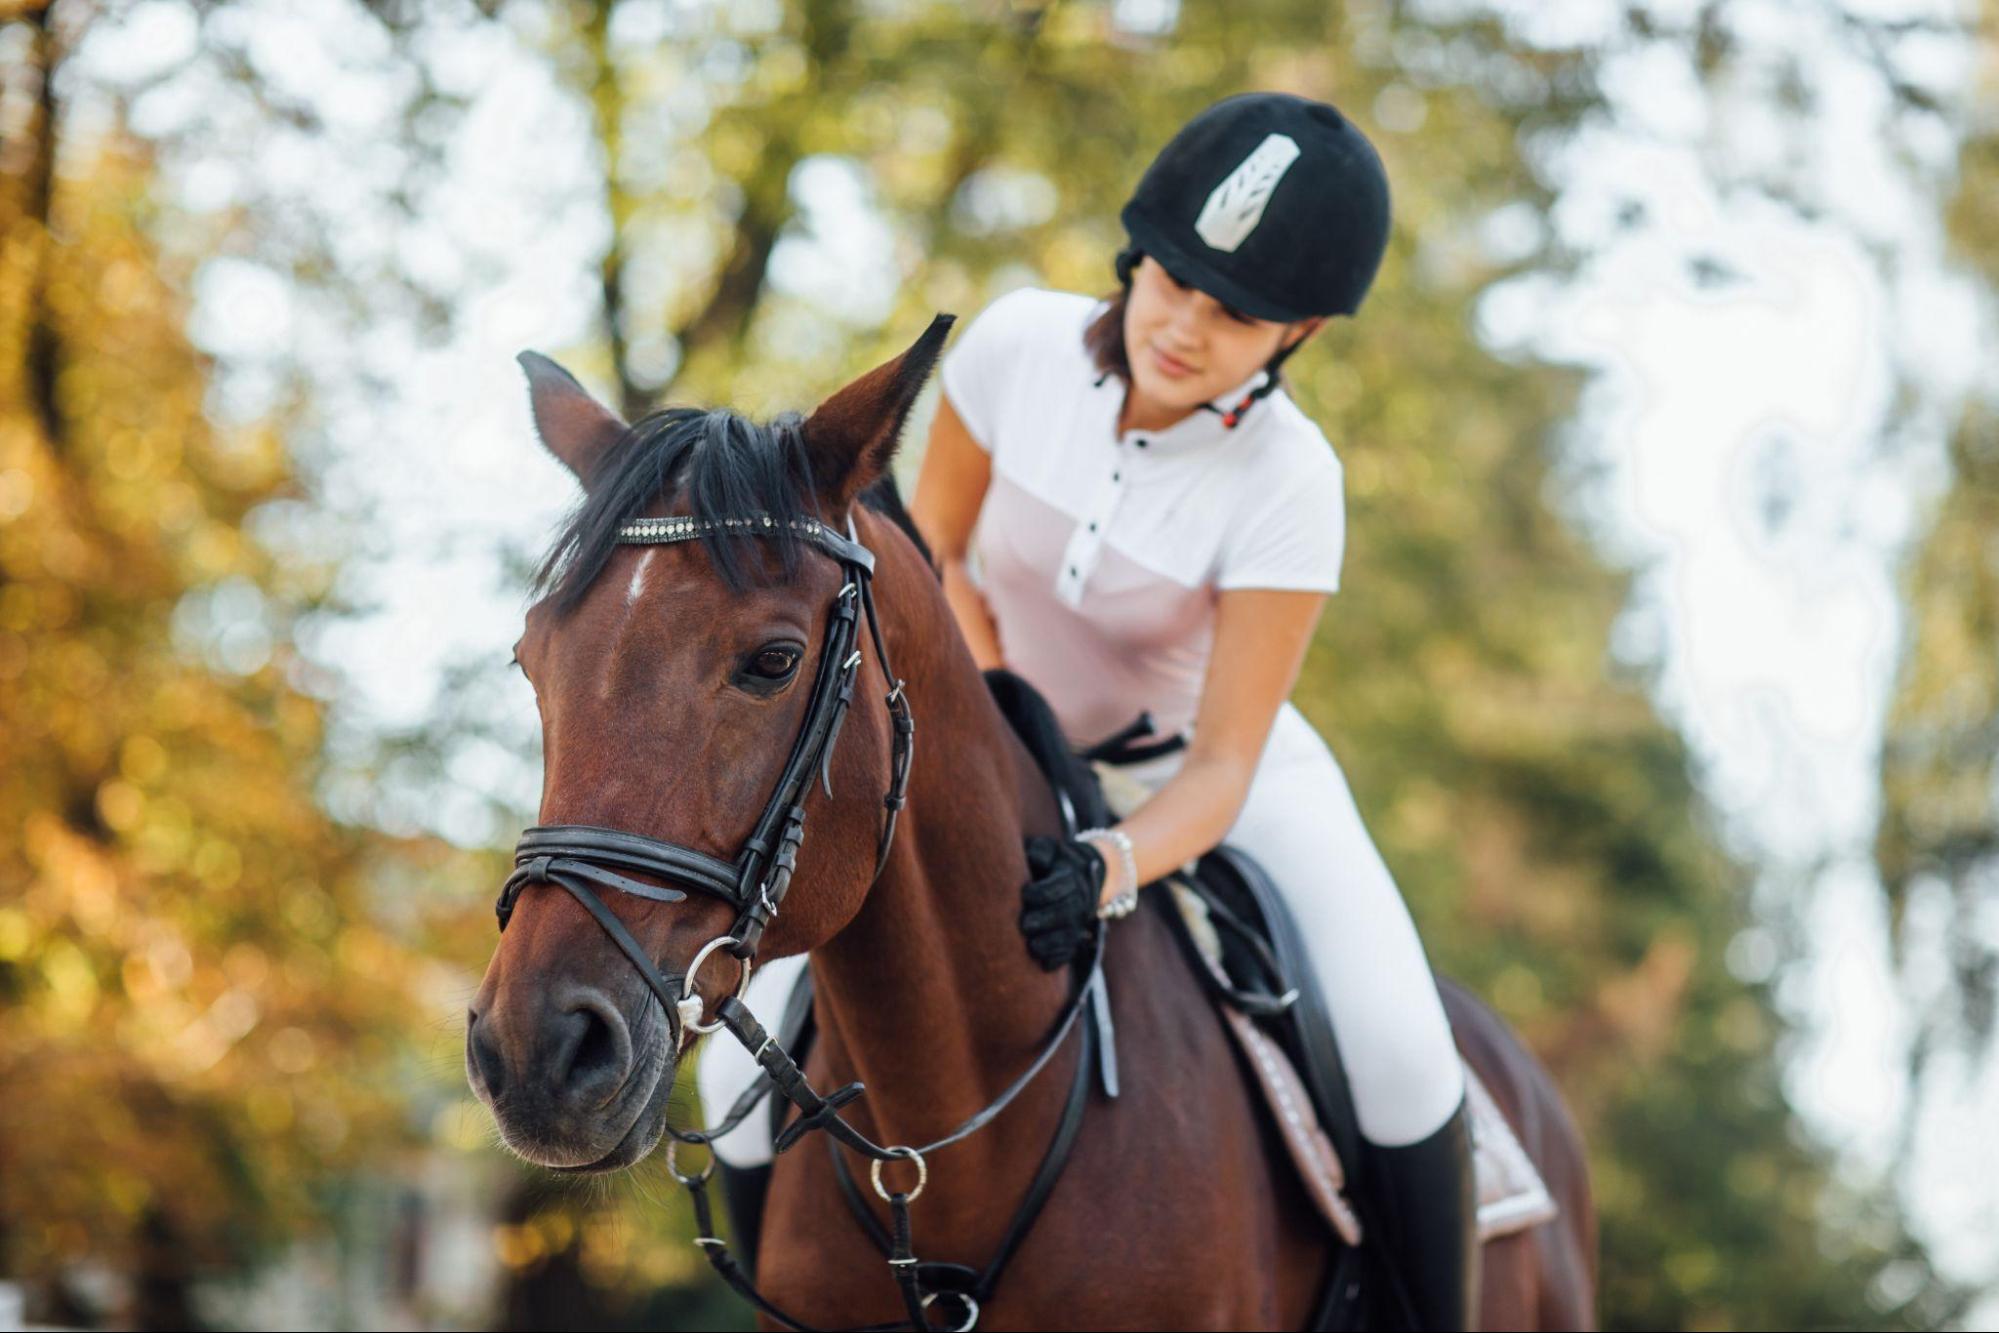 Learn More About Polo, What Are Its Benefits?